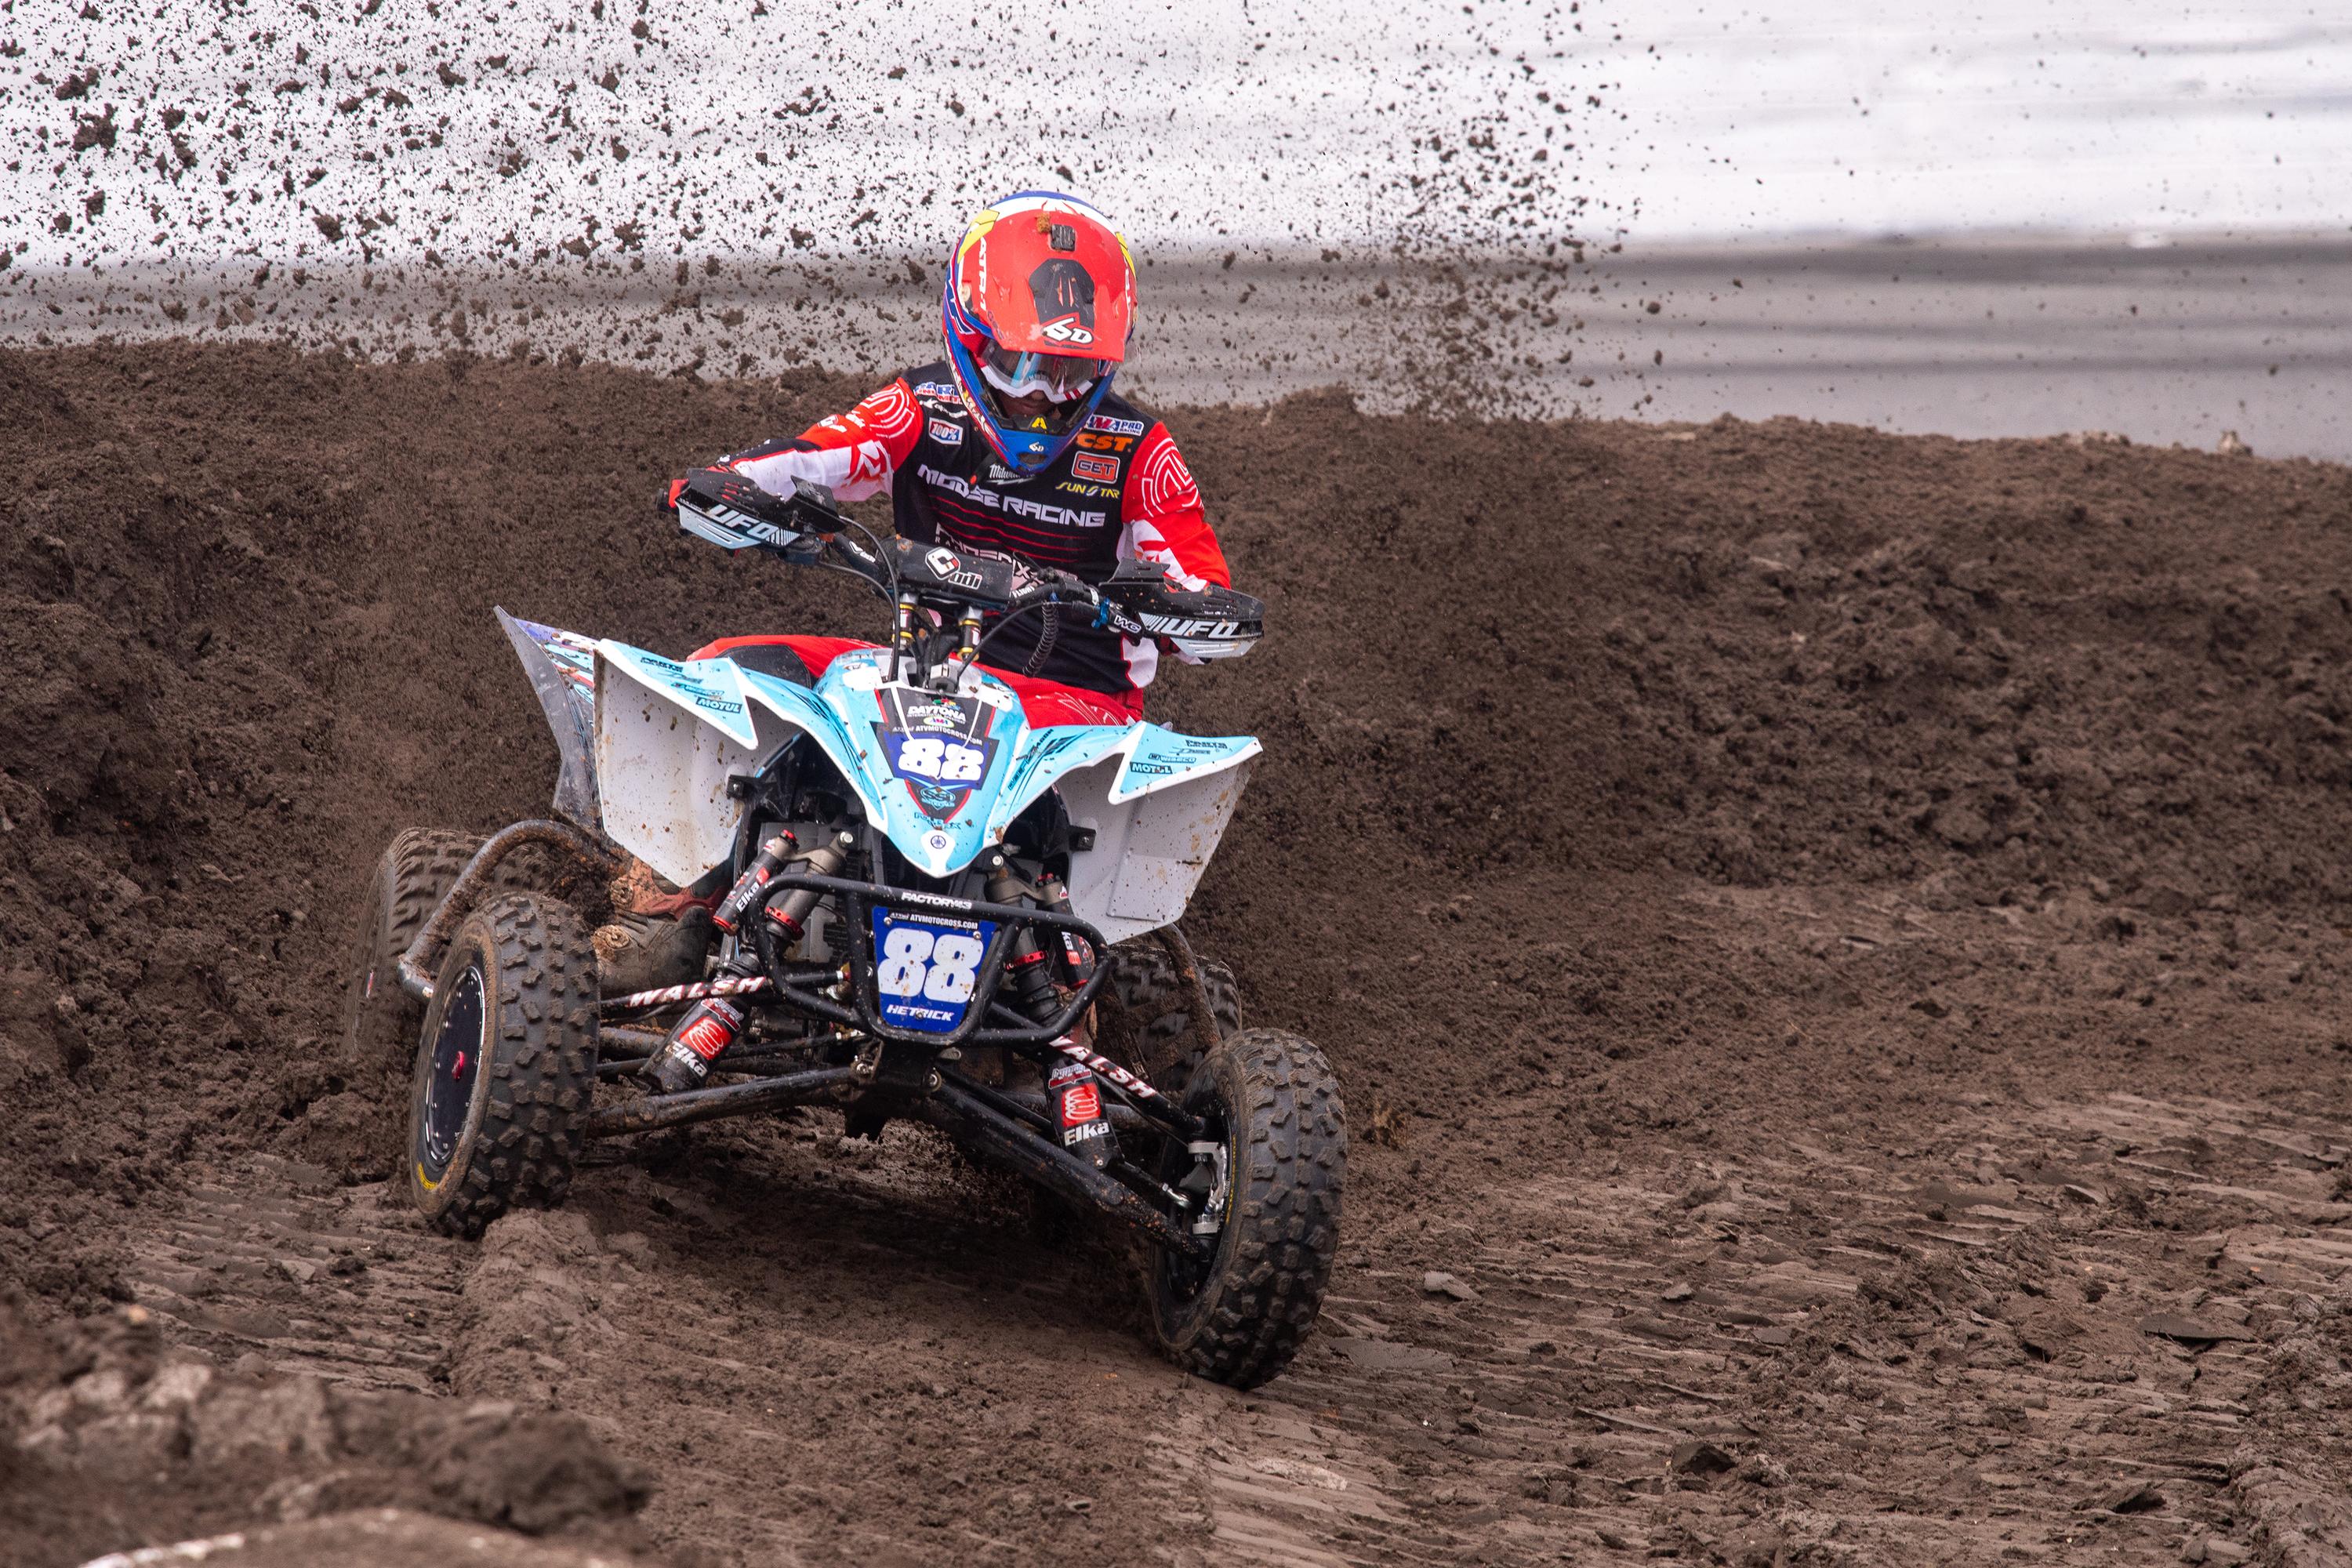 ATV Motocross Heads to Three Palms for Texas National This Weekend